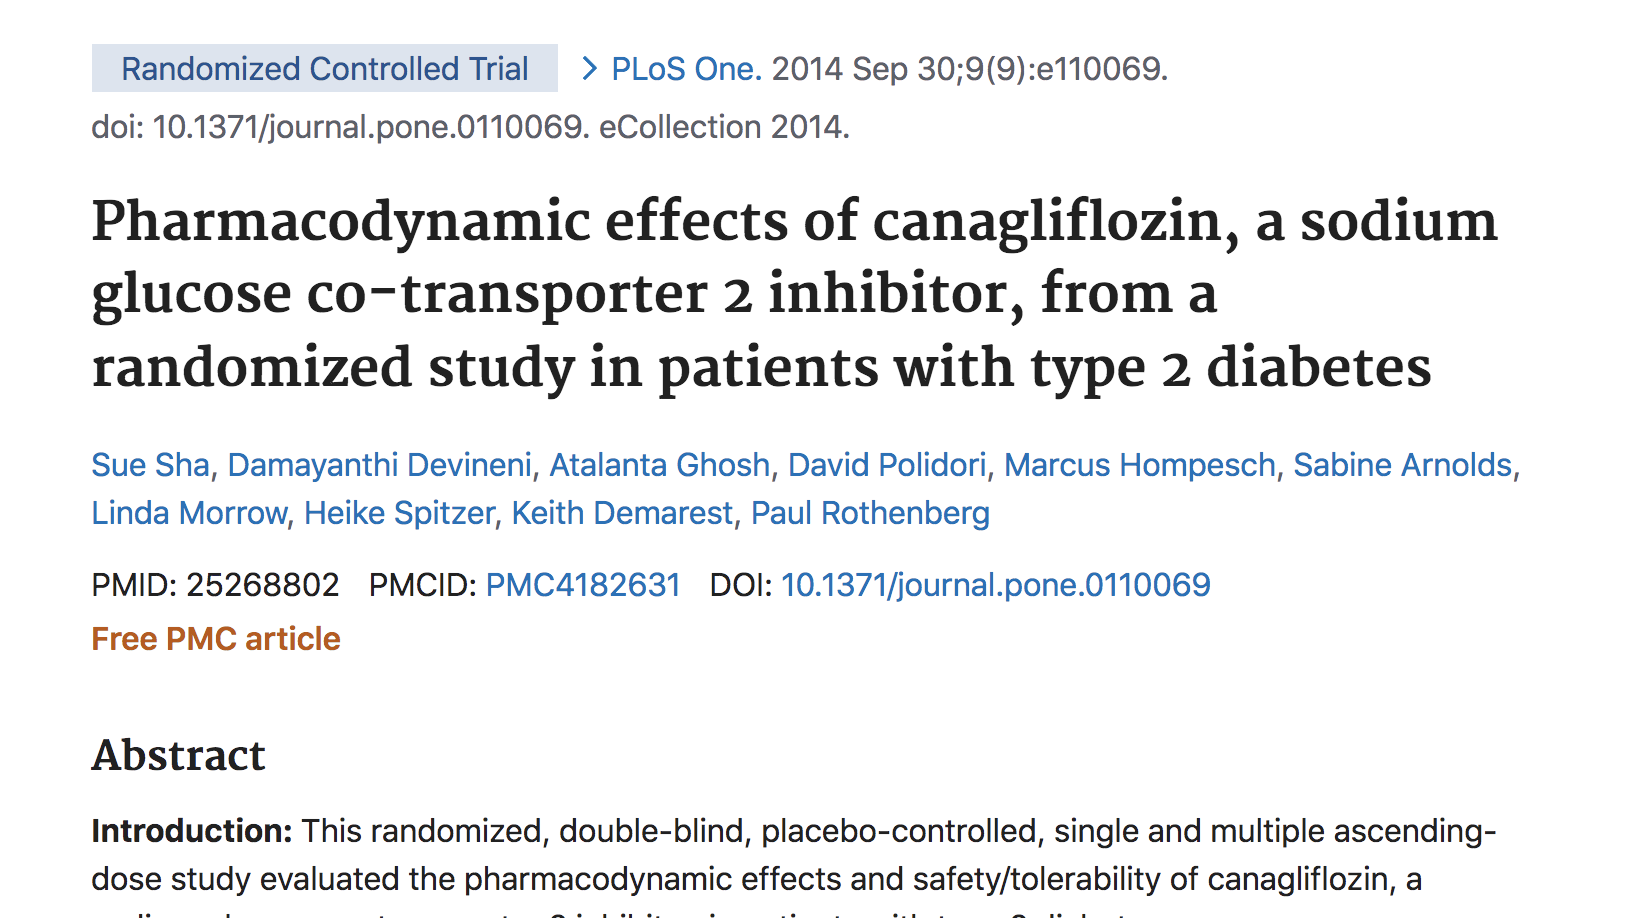 image of Pharmacodynamic effects of canagliflozin, a sodium glucose co-transporter 2 inhibitor, from a randomized study in patients with type 2 diabetes.